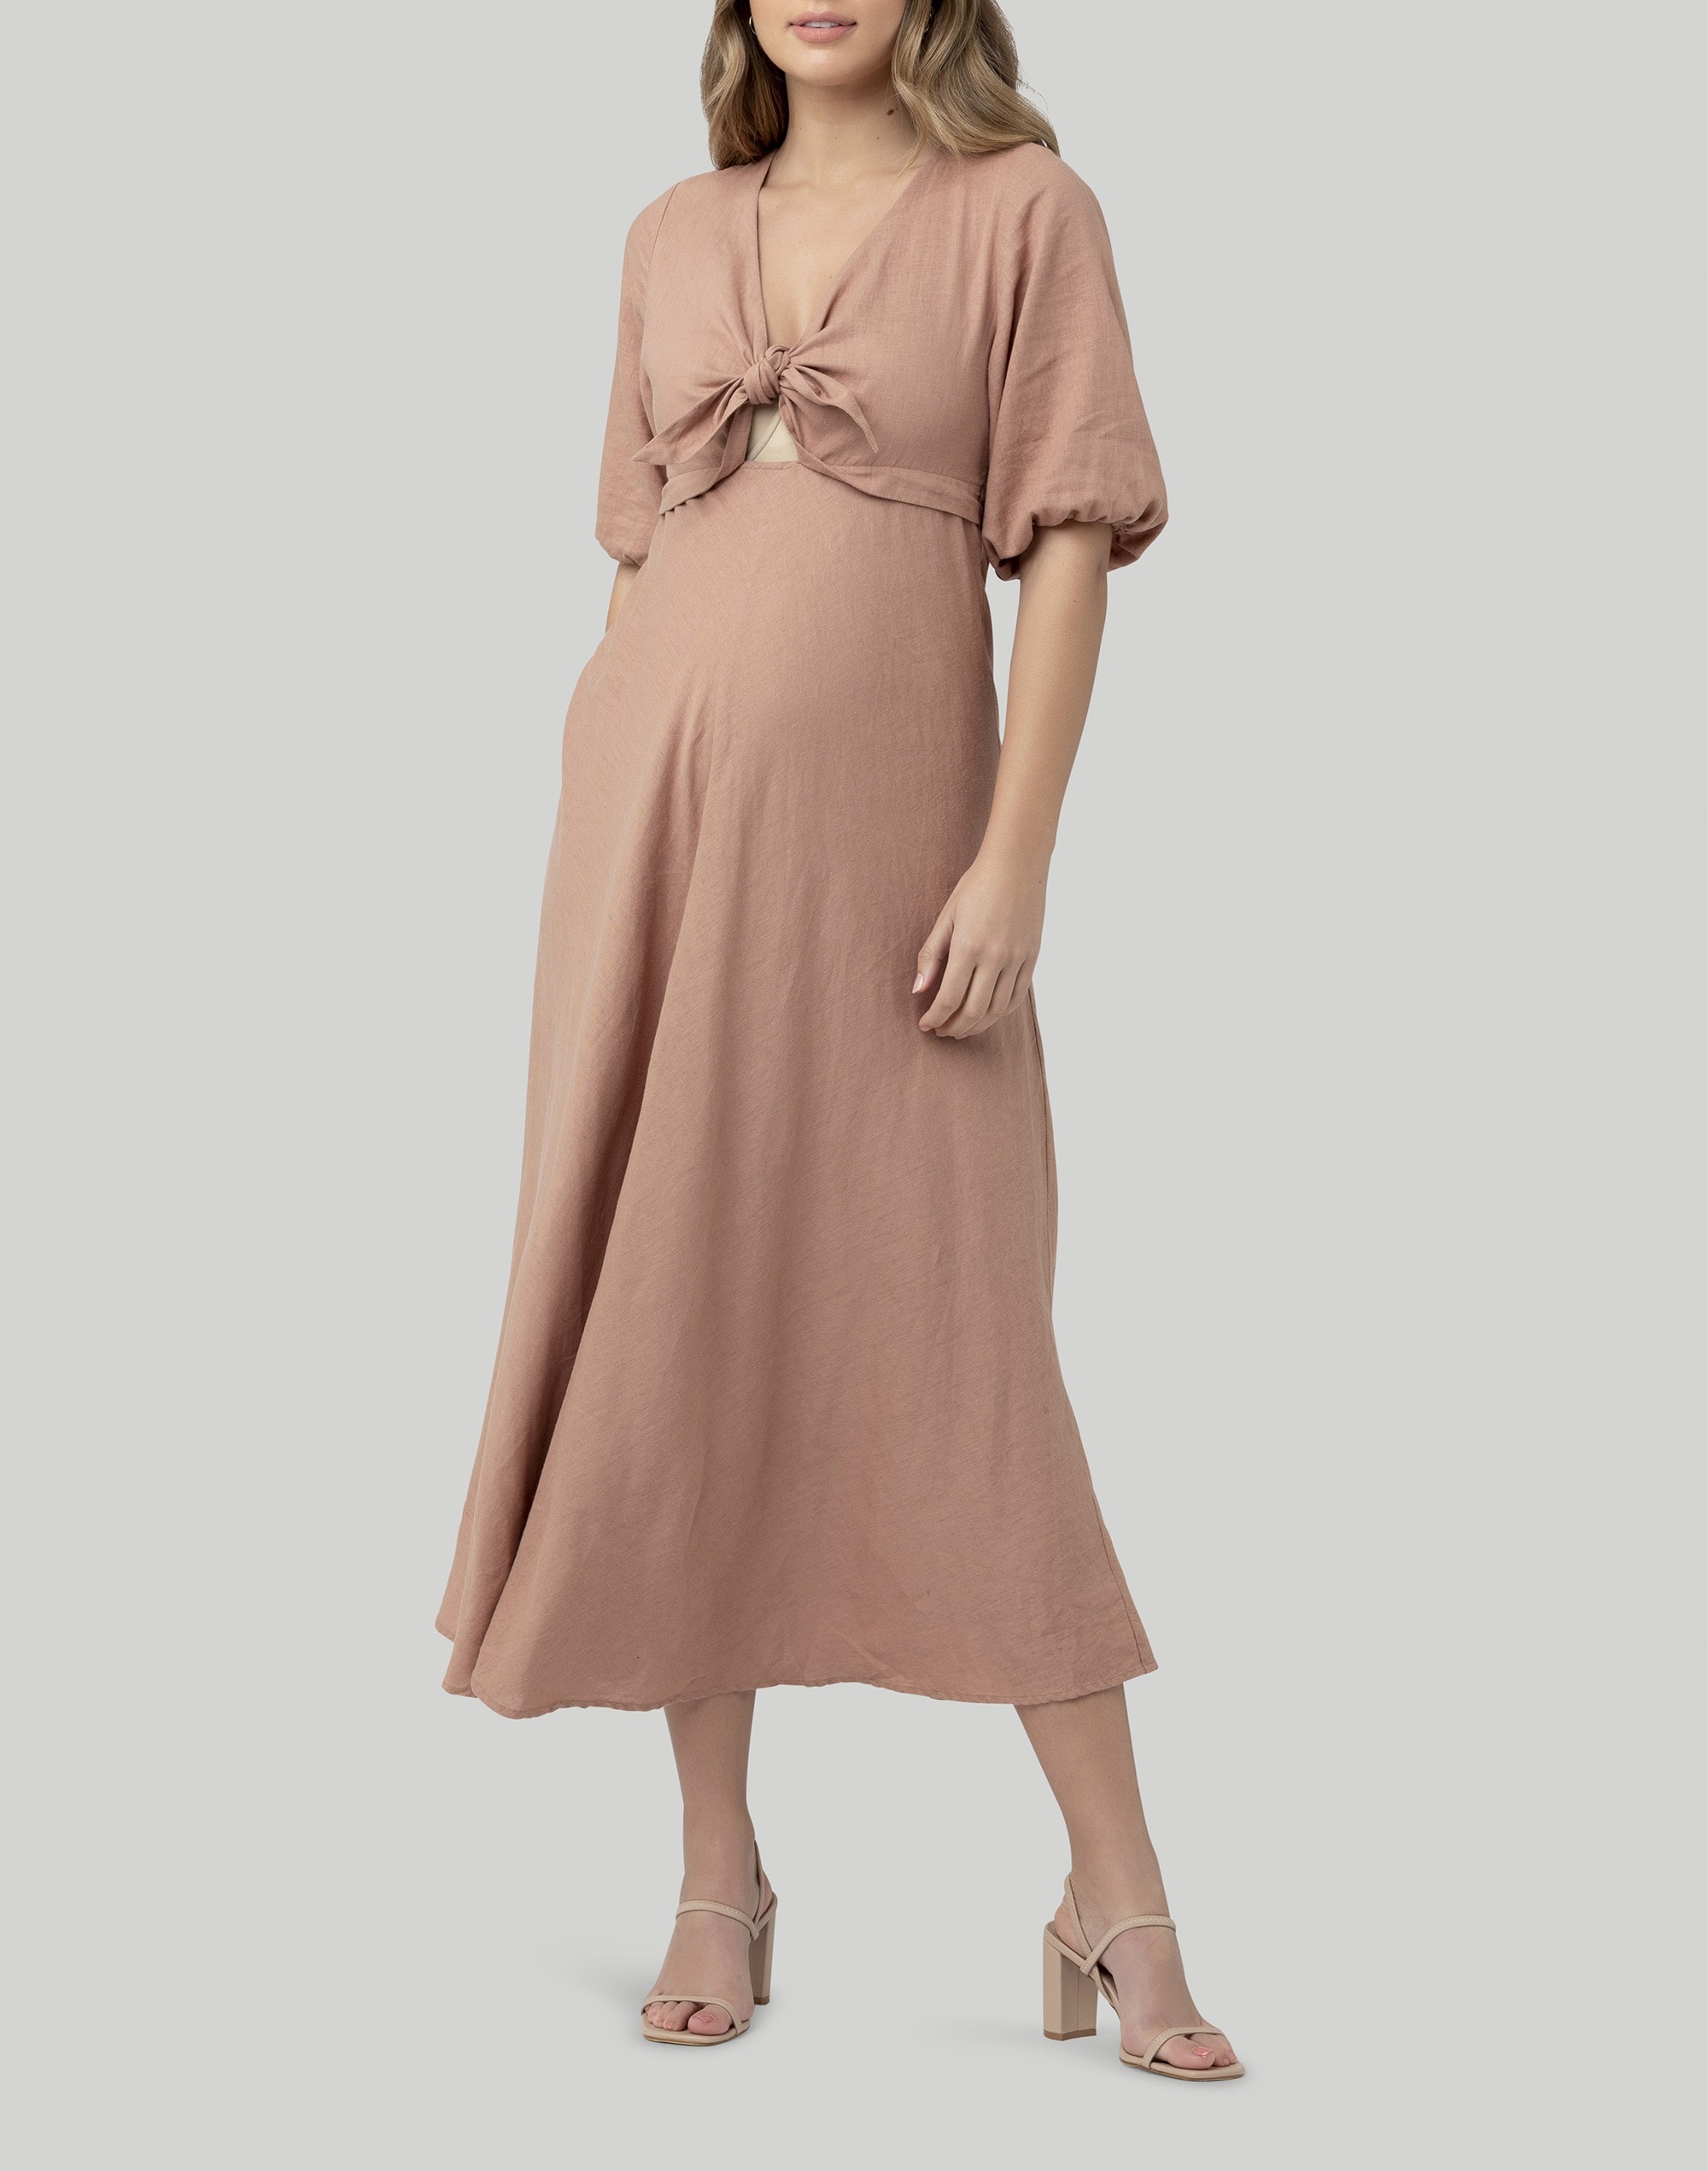 Ripe Maternity Camille Tie Front Dress